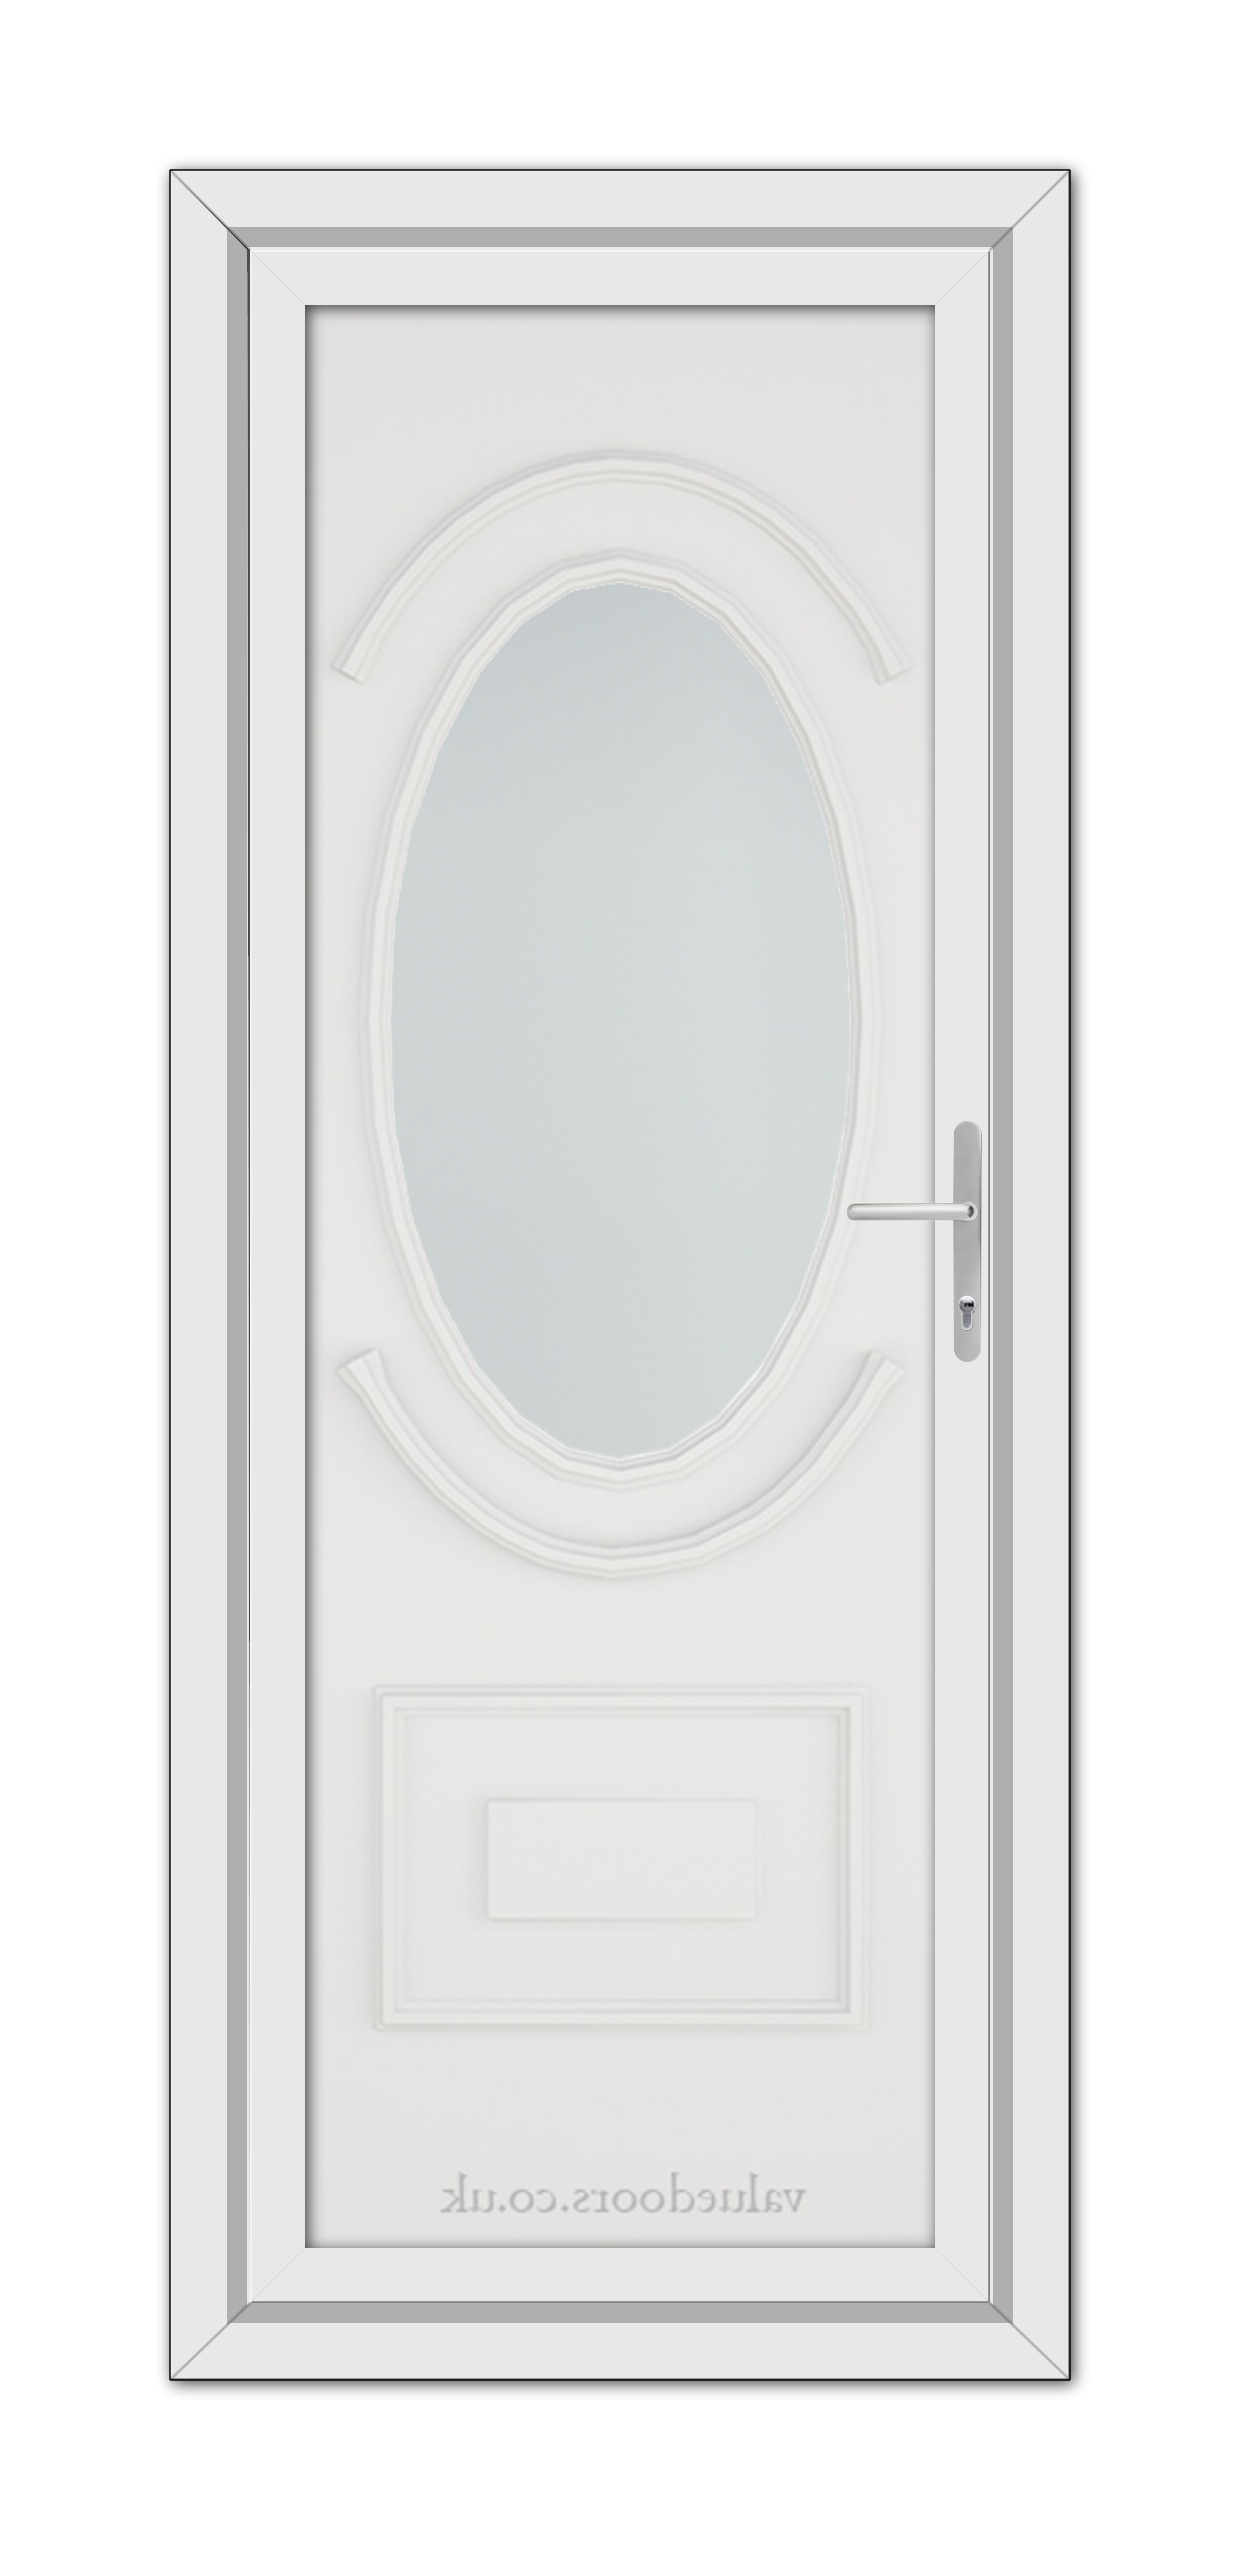 White Richmond uPVC Door with an oval glass panel and a metallic handle, set in a simple frame, viewed from the front.